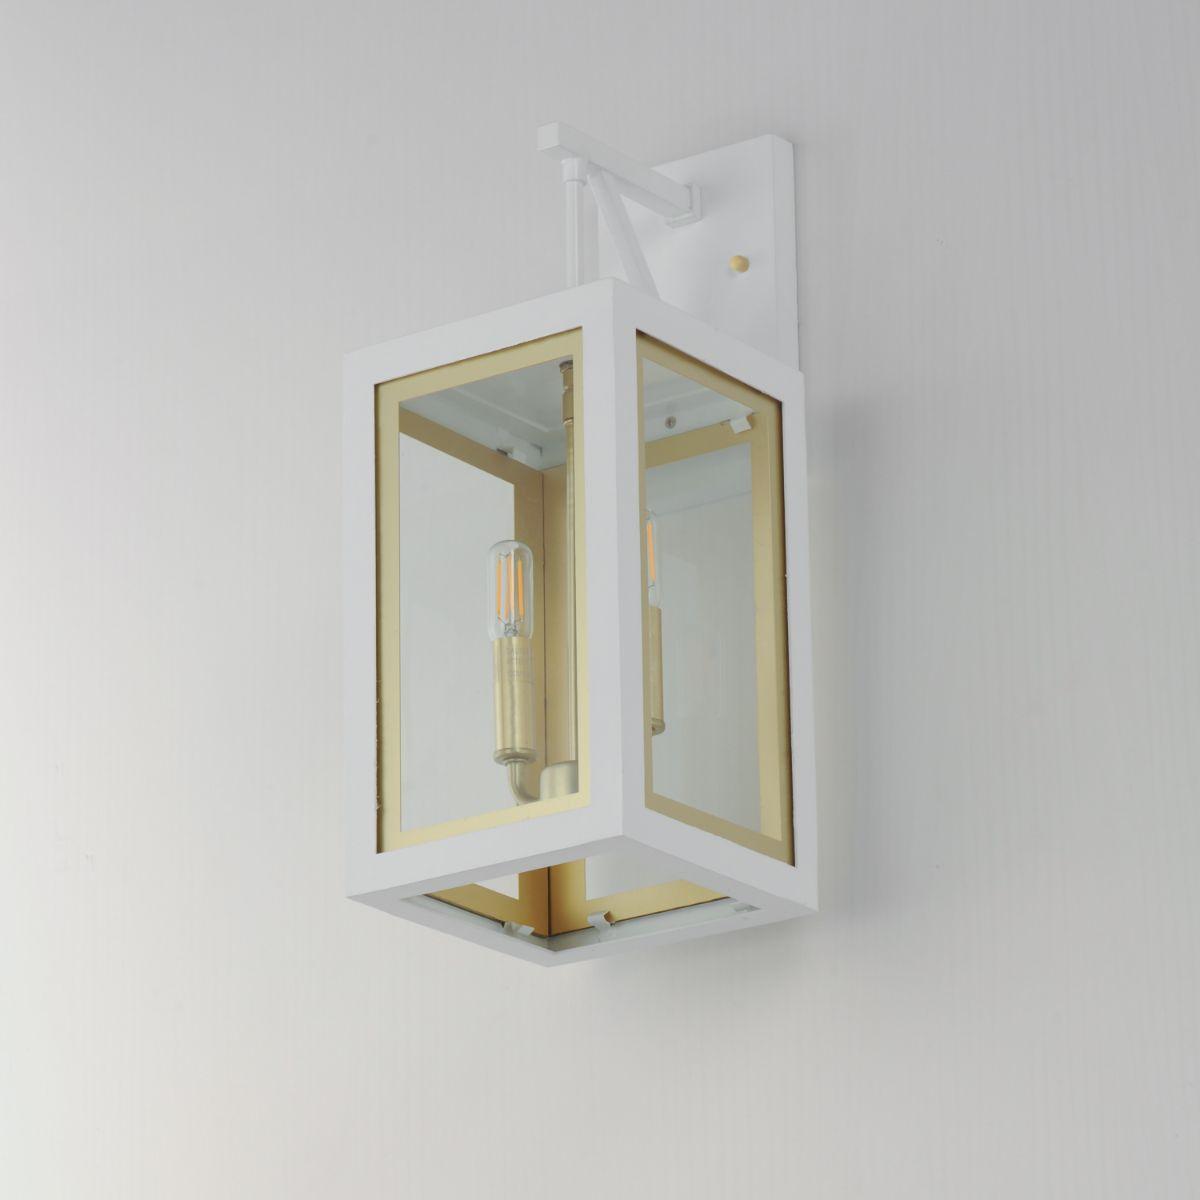 Neoclass 18 in. 2 lights Outdoor Wall Sconce